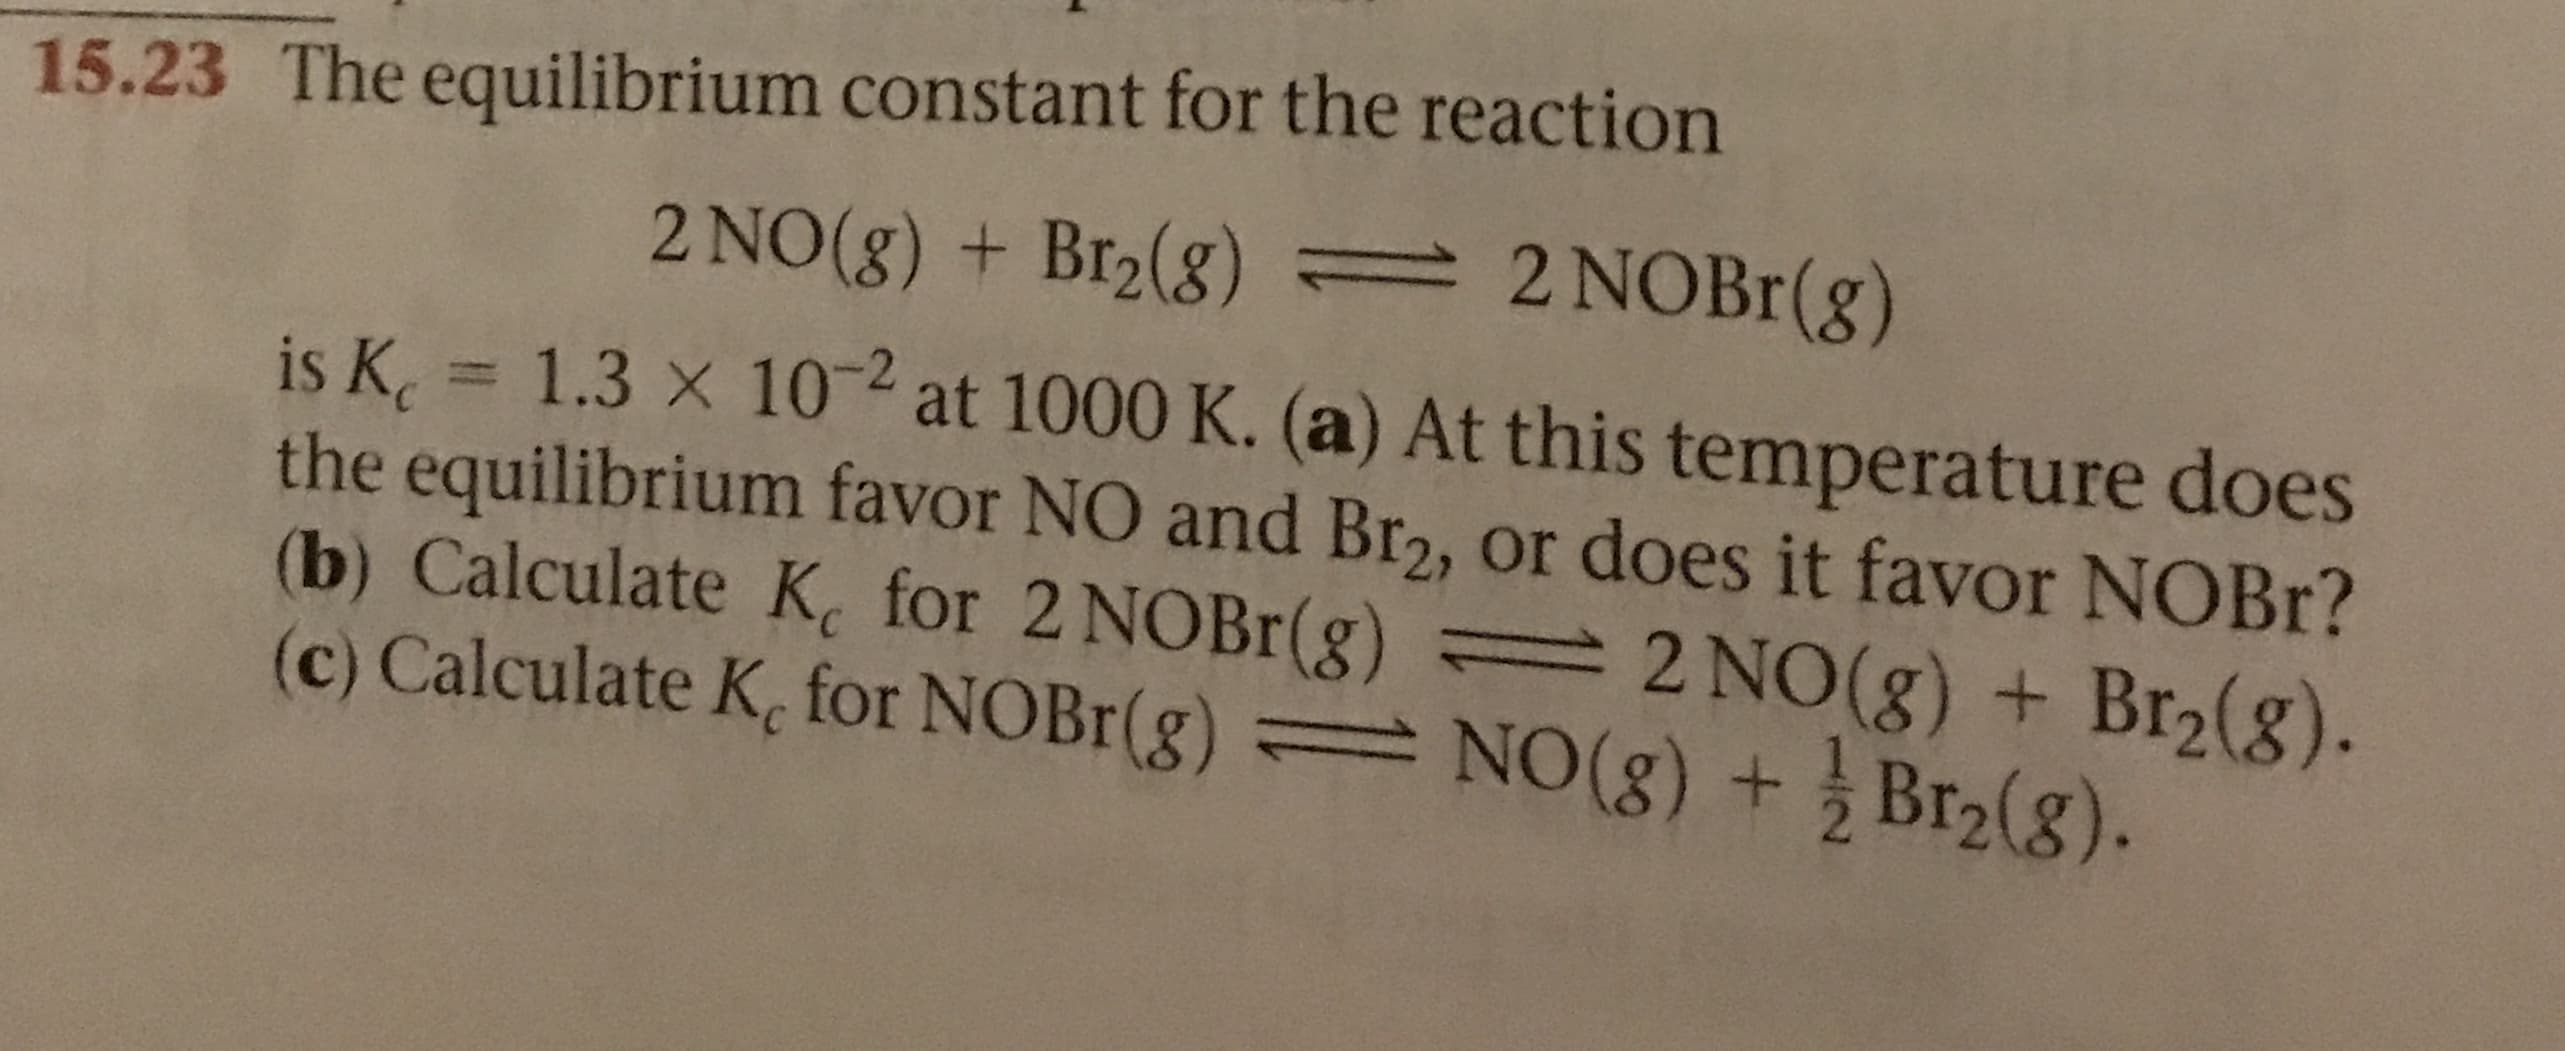 15.23 The equilibrium constant for the reaction
2 NOBr (g)
2 NO(g) + Br2(g)
2
is K 1.3 x 10 at 1000 K. (a) At this temperature does
the equilibrium favor NO and Br2, or does it favor NOBR?
(b) Calculate K for 2 NOBr(g) = 2 NO(g ) + Br2(g).
(c) Calculate K, for NOBr(g) NO (g) +Br2(g).
